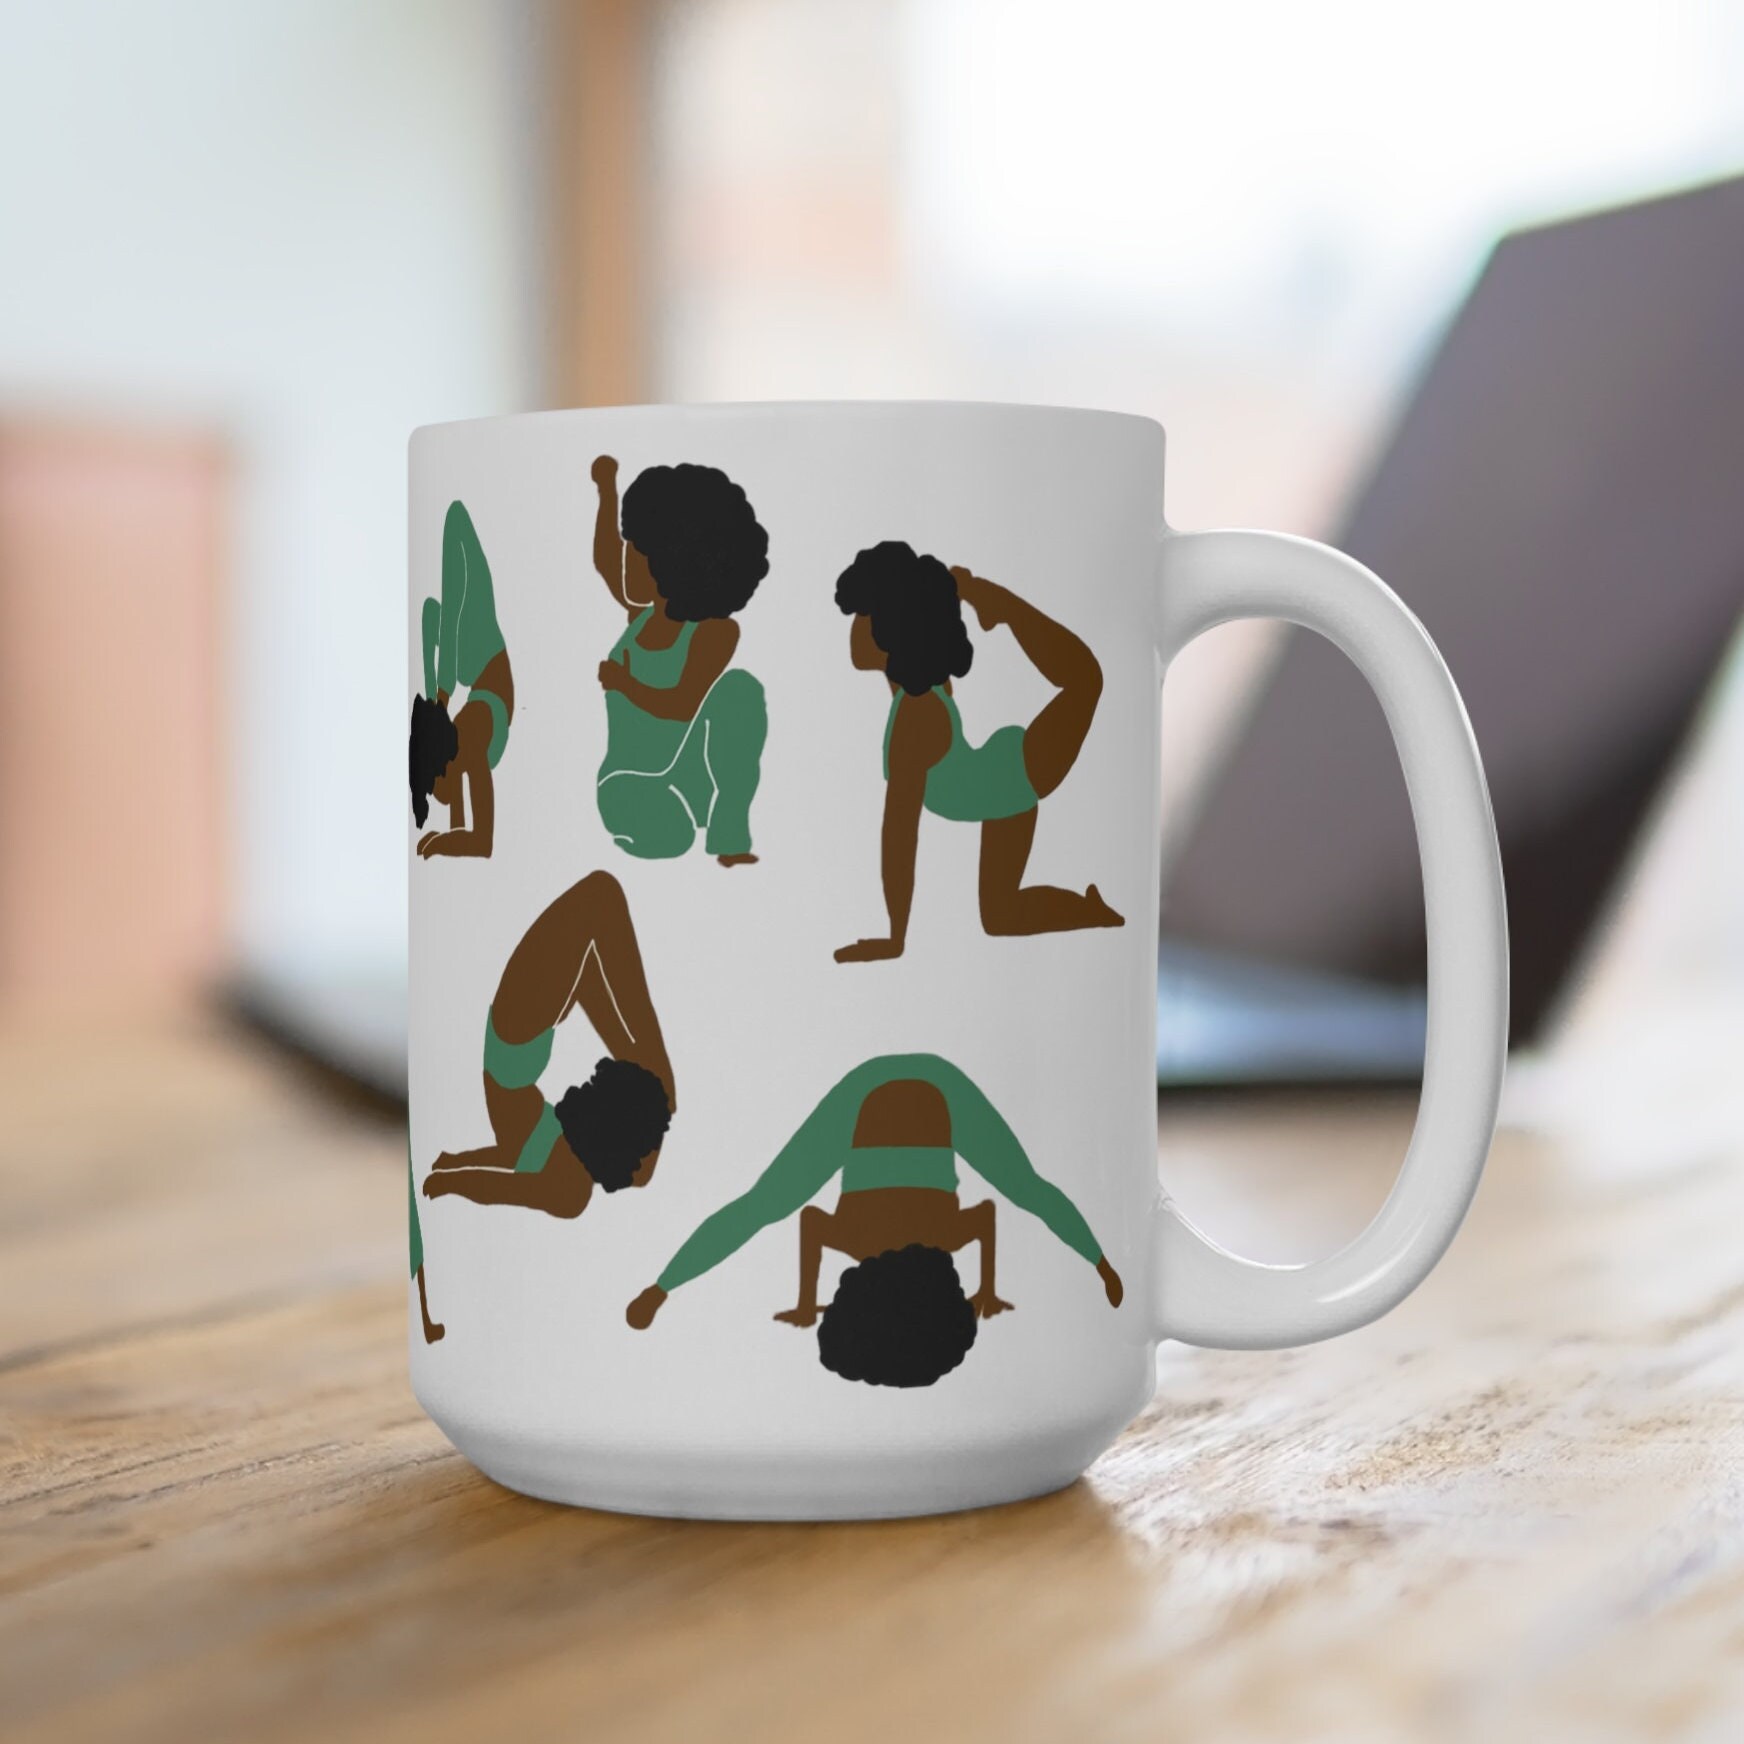 I Love Yoga Gifts, Gifts for Yoga Lovers, Yoga Gift Ideas, Best